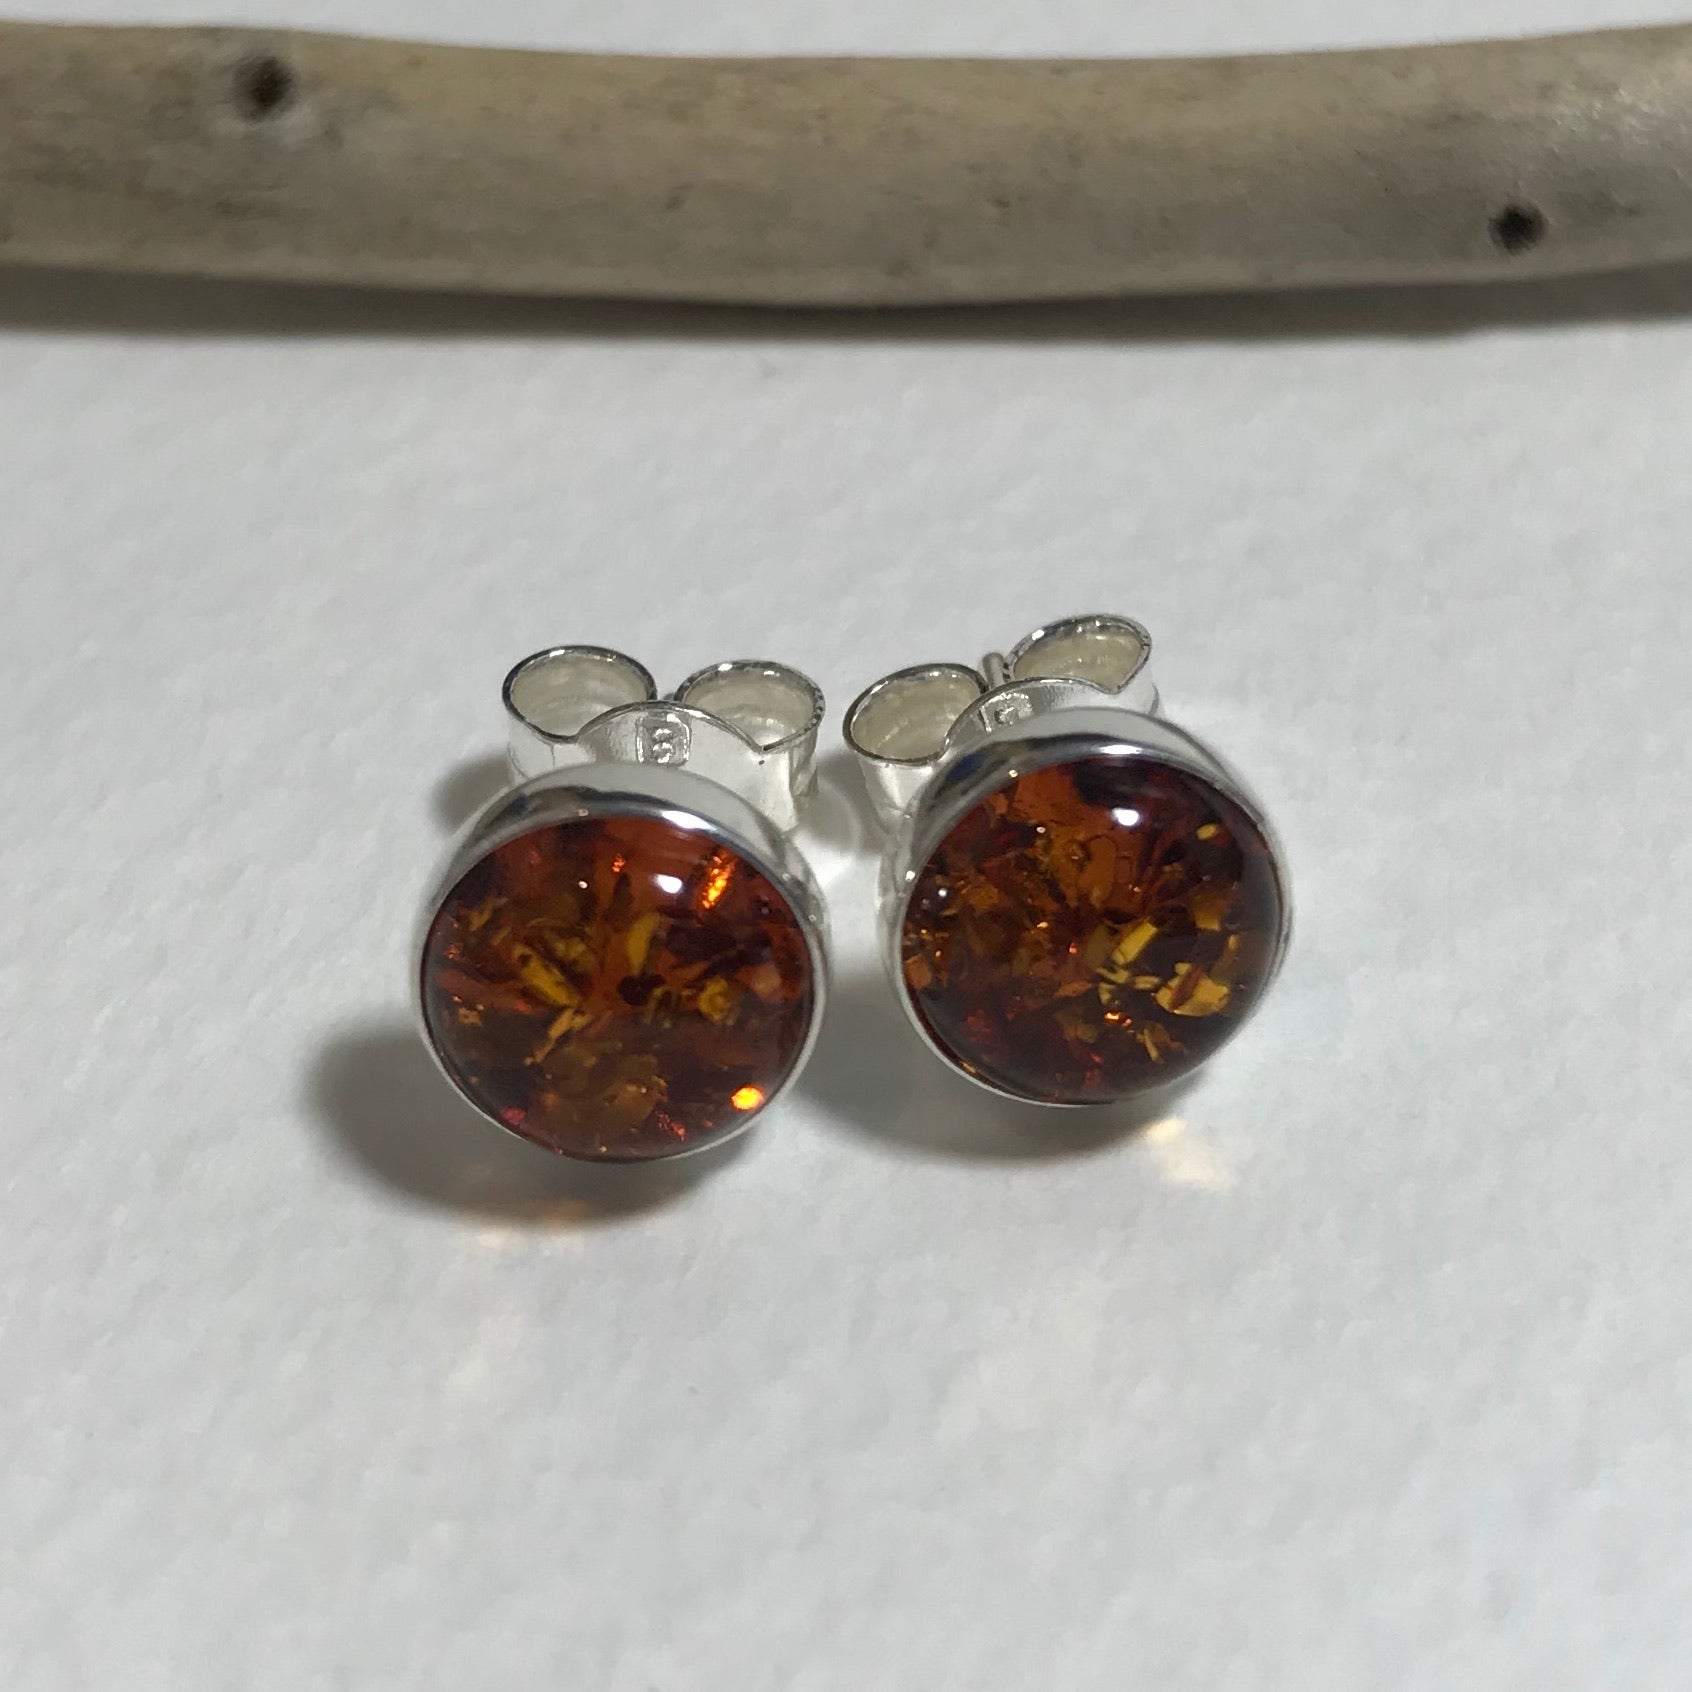 Small Round Stud Earrings - The Nancy Smillie Shop - Art, Jewellery & Designer Gifts Glasgow